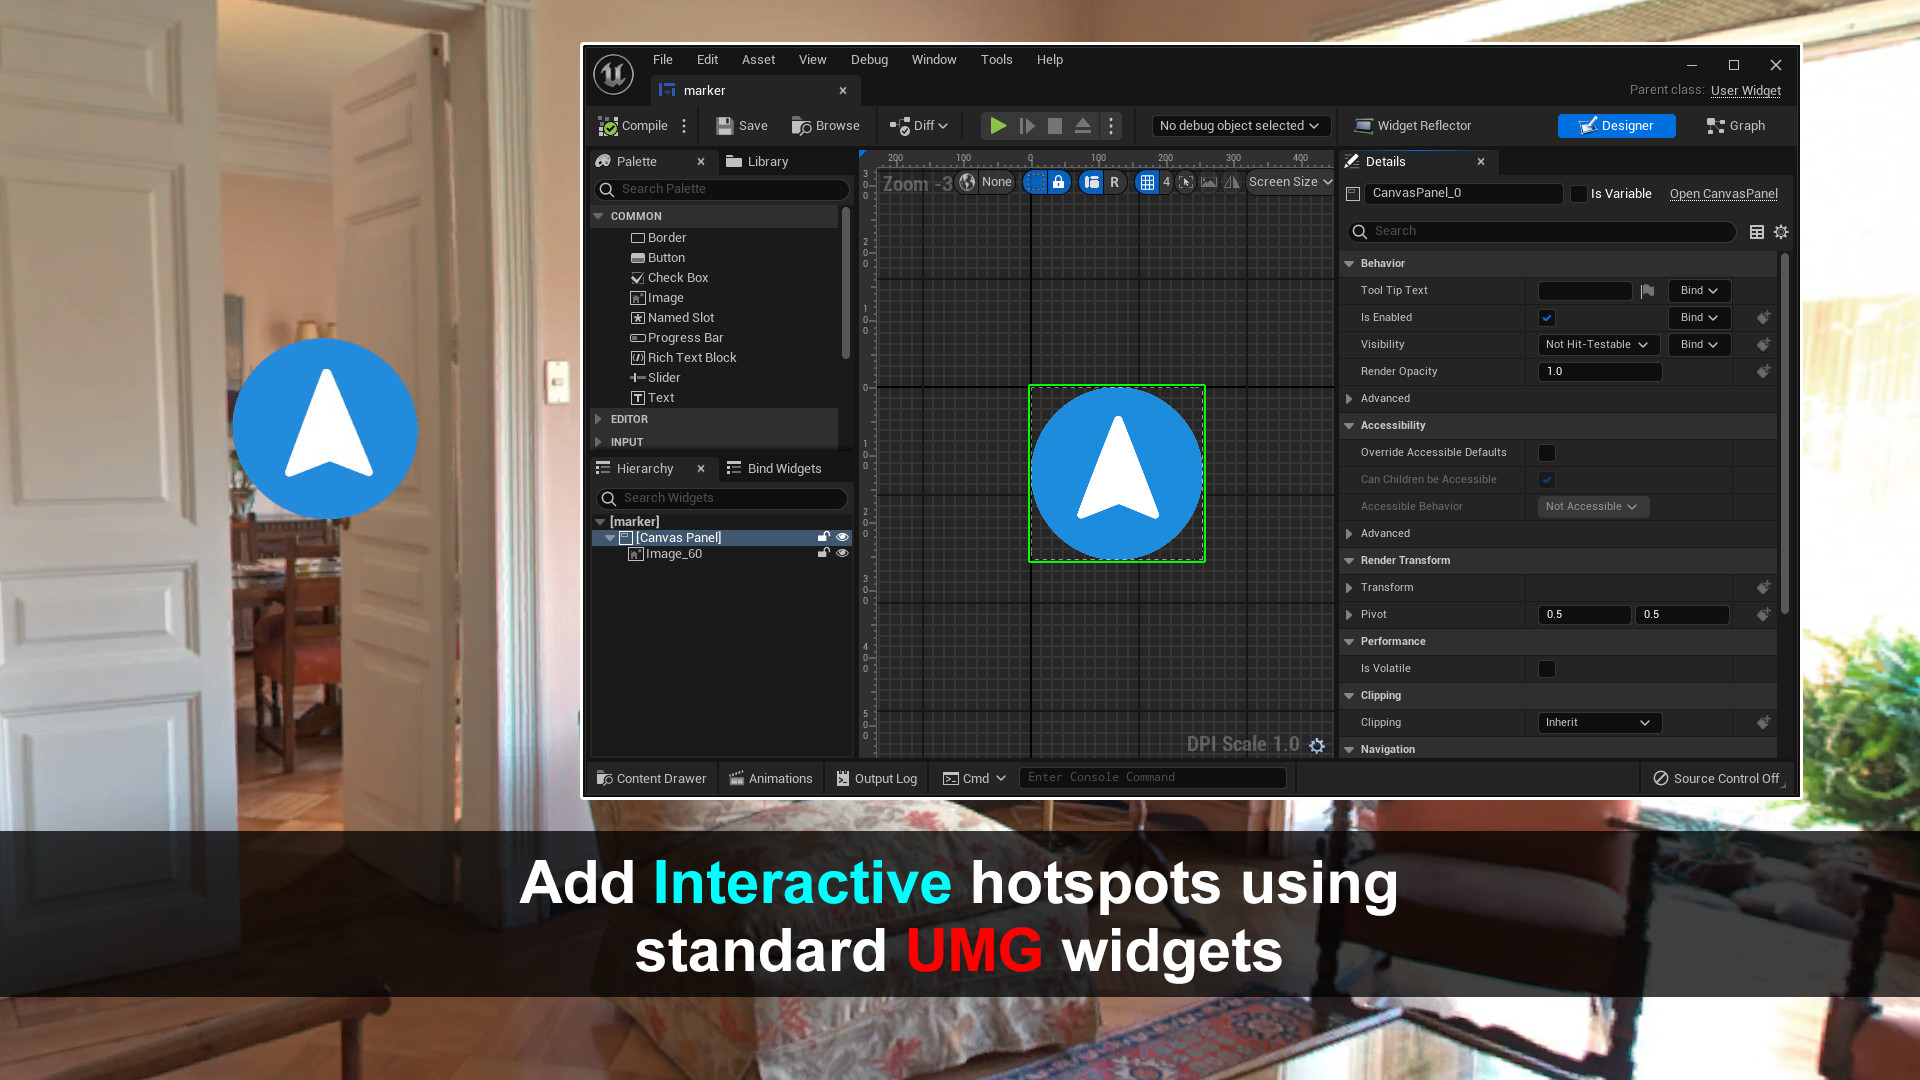 Use normal UMG widgets for your custom interactive hotspots